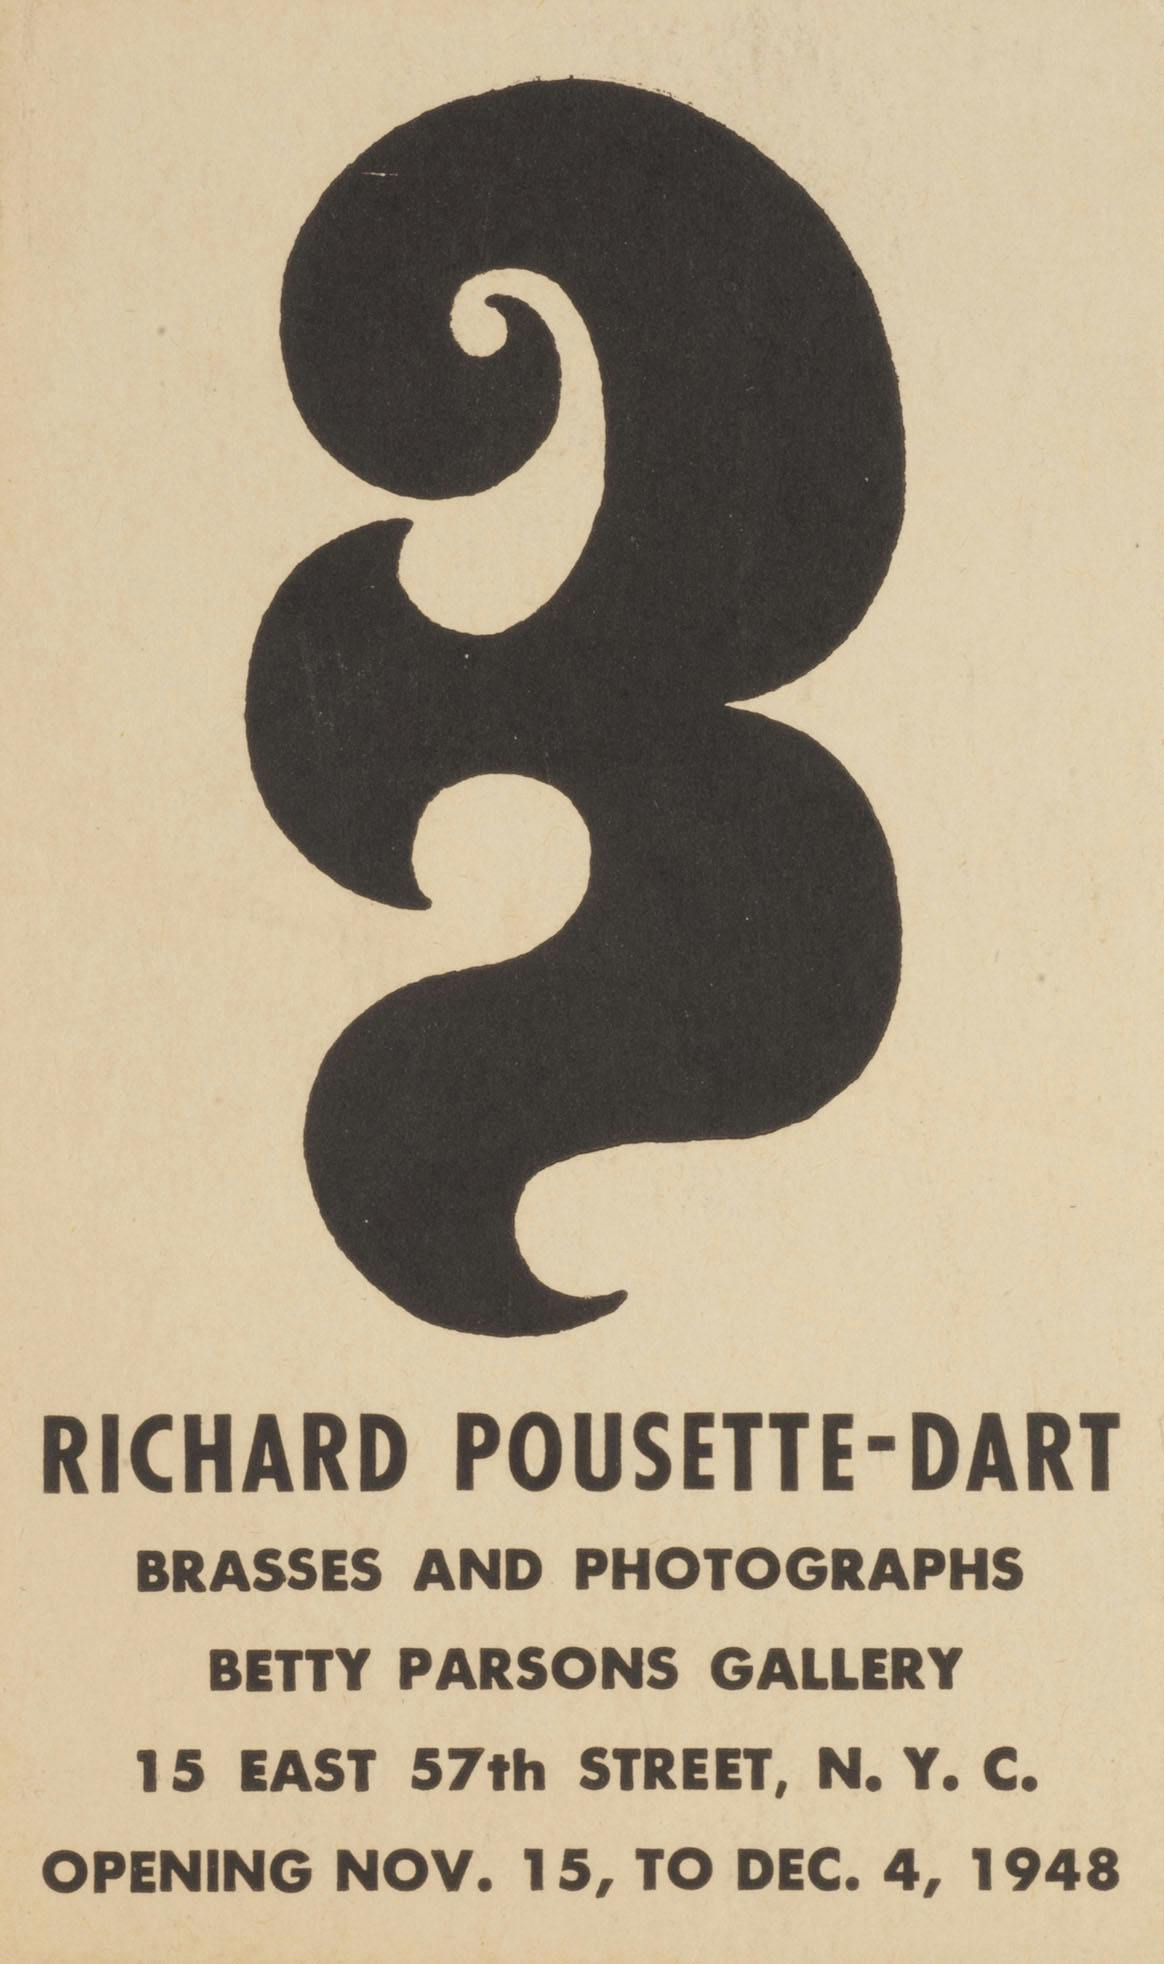 Exhibition announcement, Brasses and Photographs, Betty Parsons Gallery, New York, NY, 1948. – The Richard Pousette-Dart Foundation